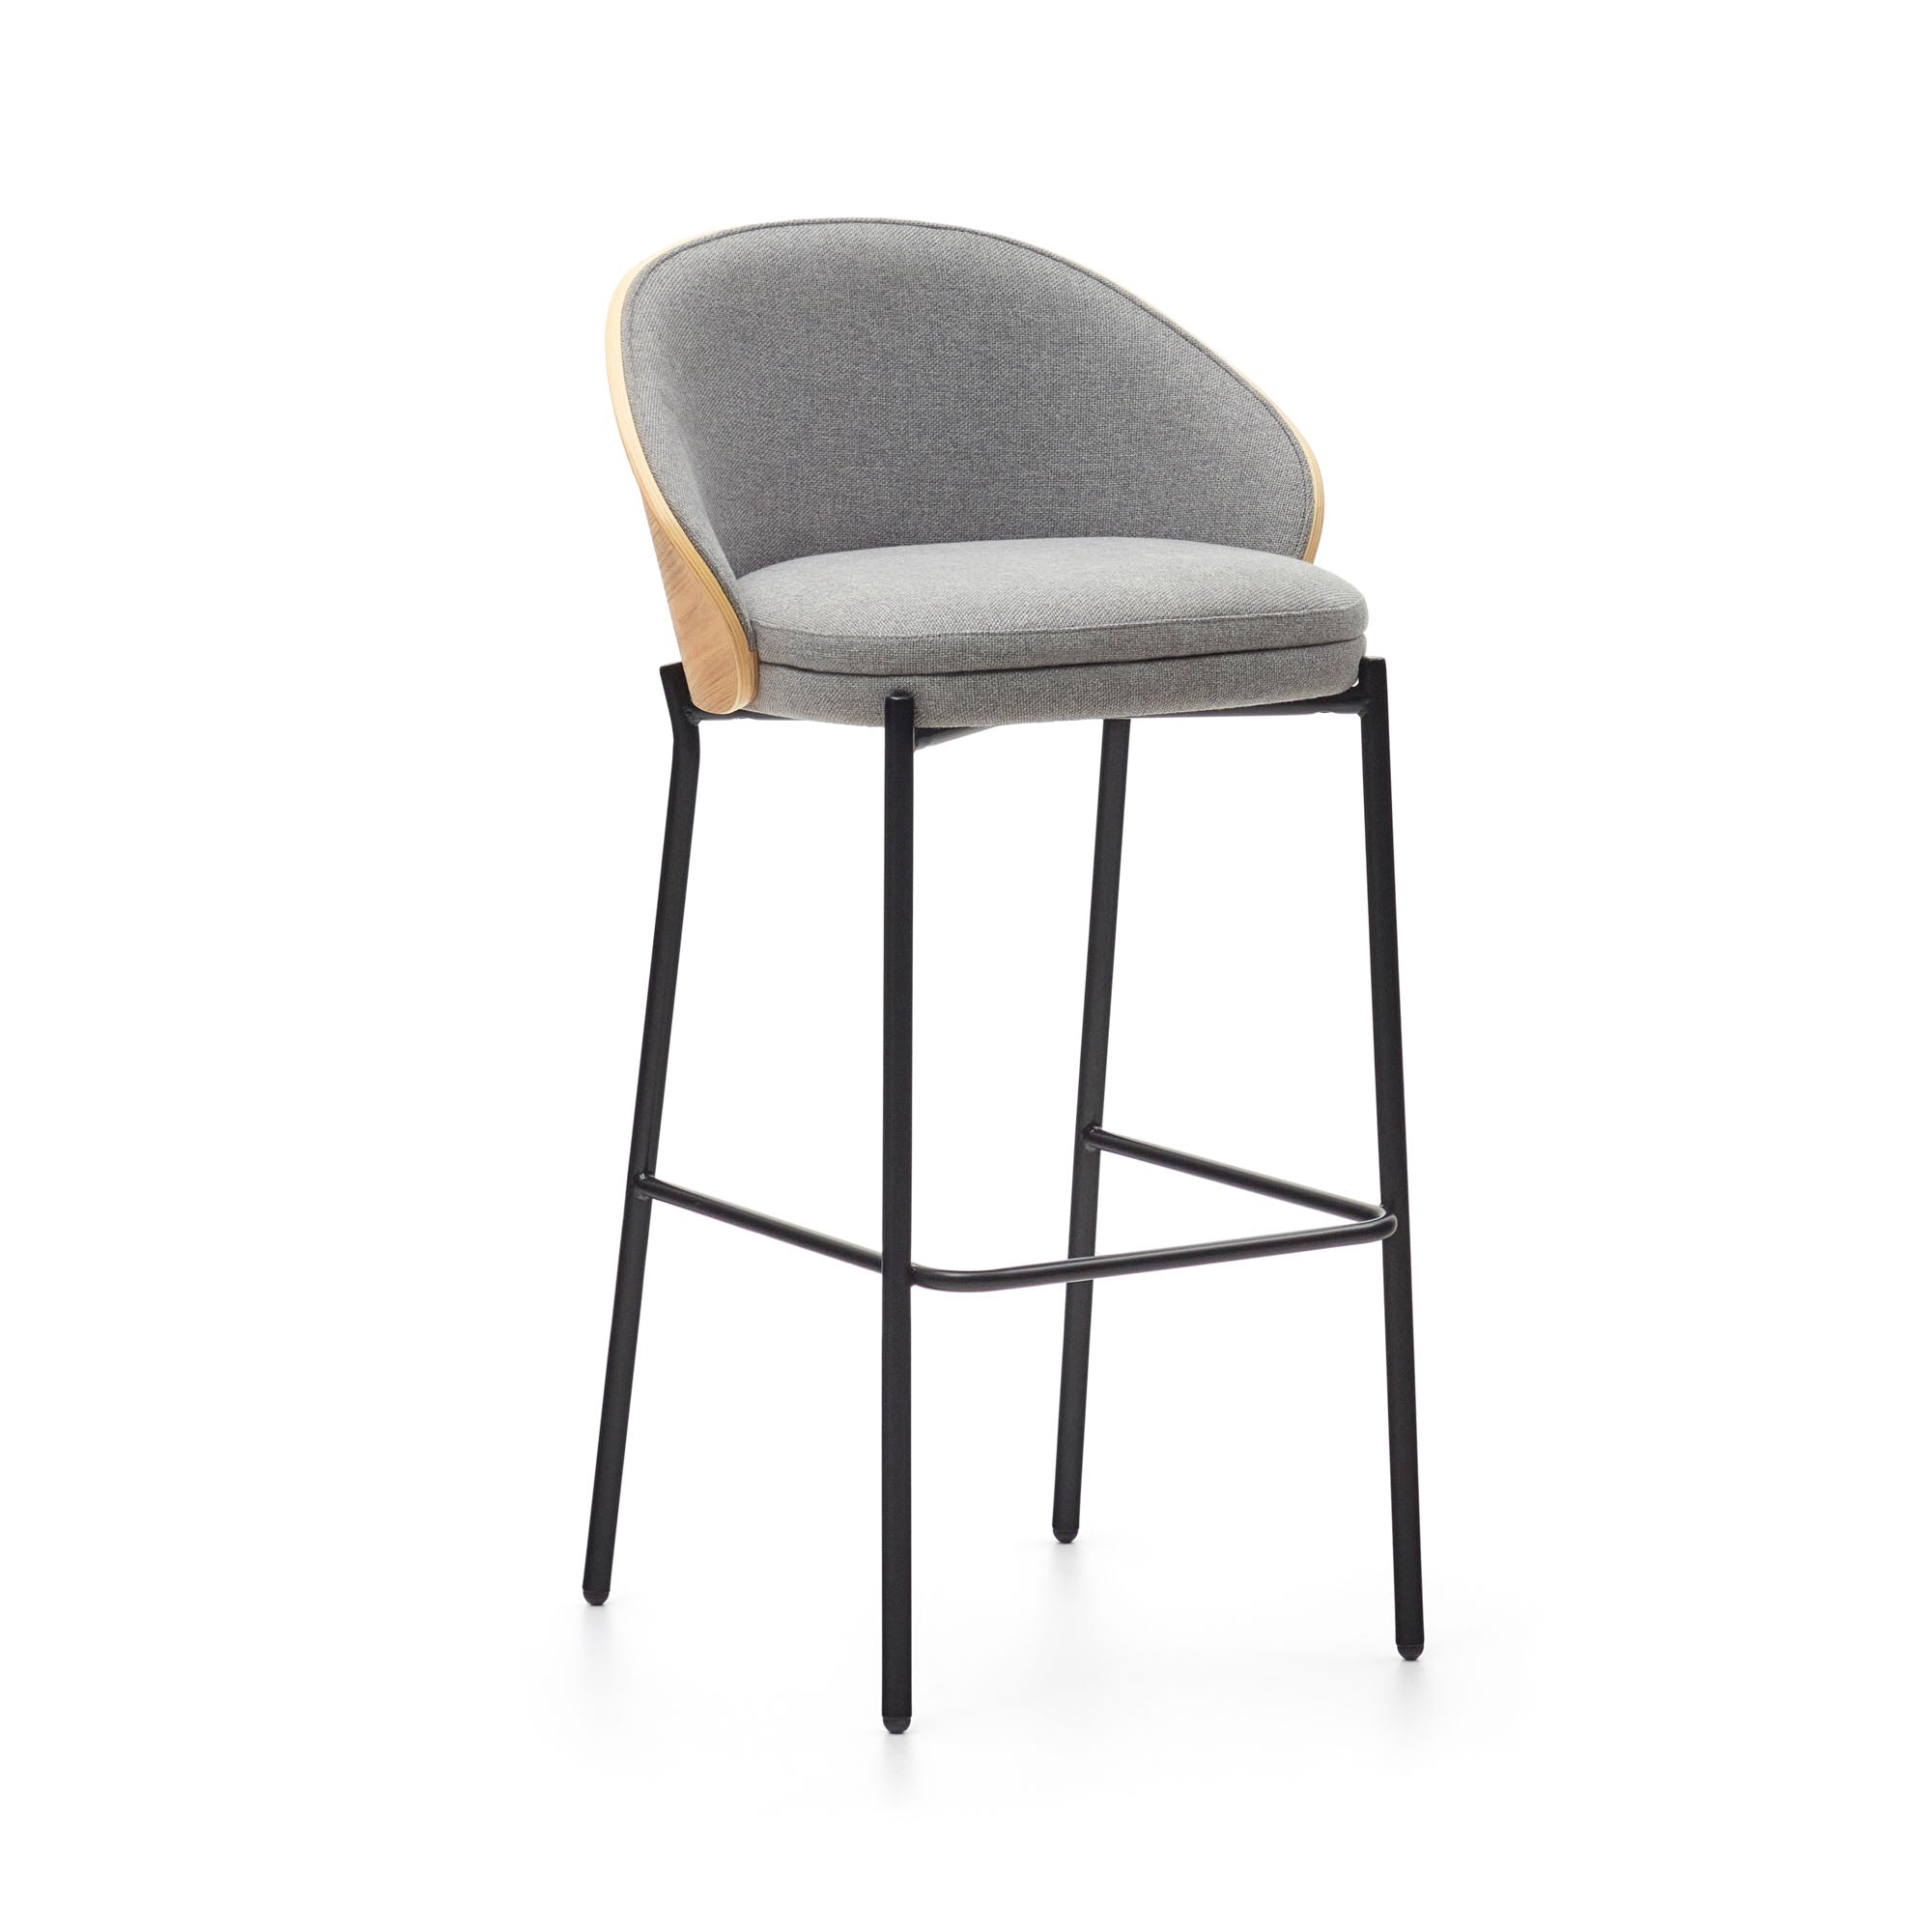 Eamy light grey stool in an ash wood veneer with a natural finish and black metal, 75 cm